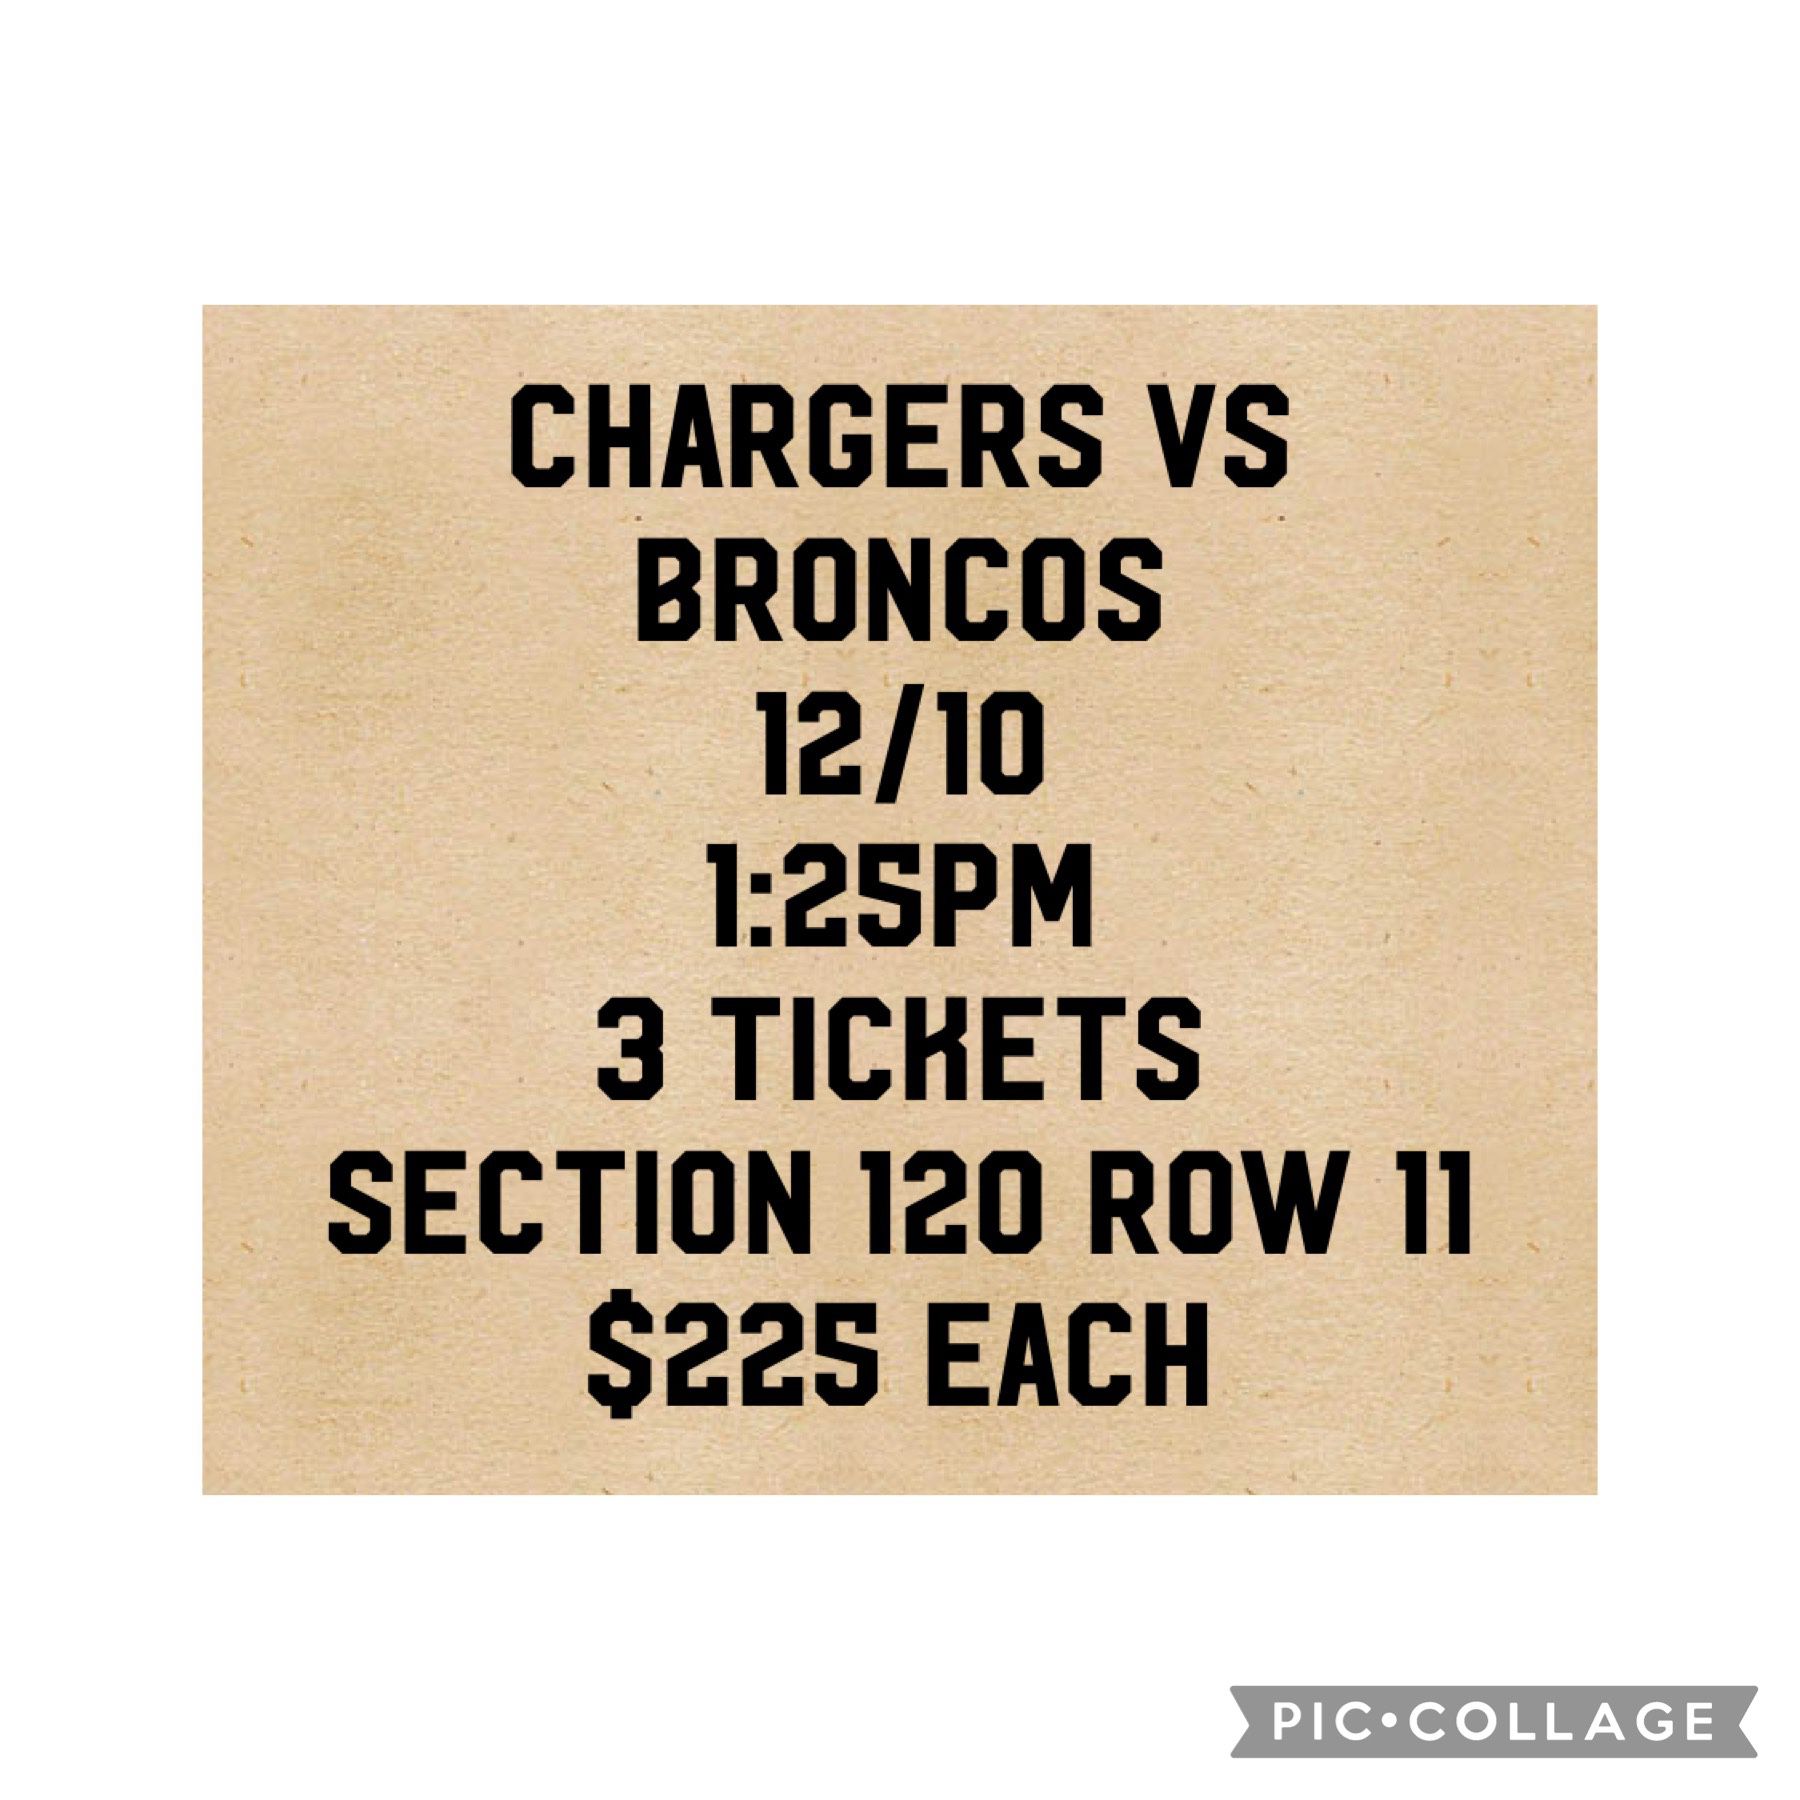 Chargers/broncos 